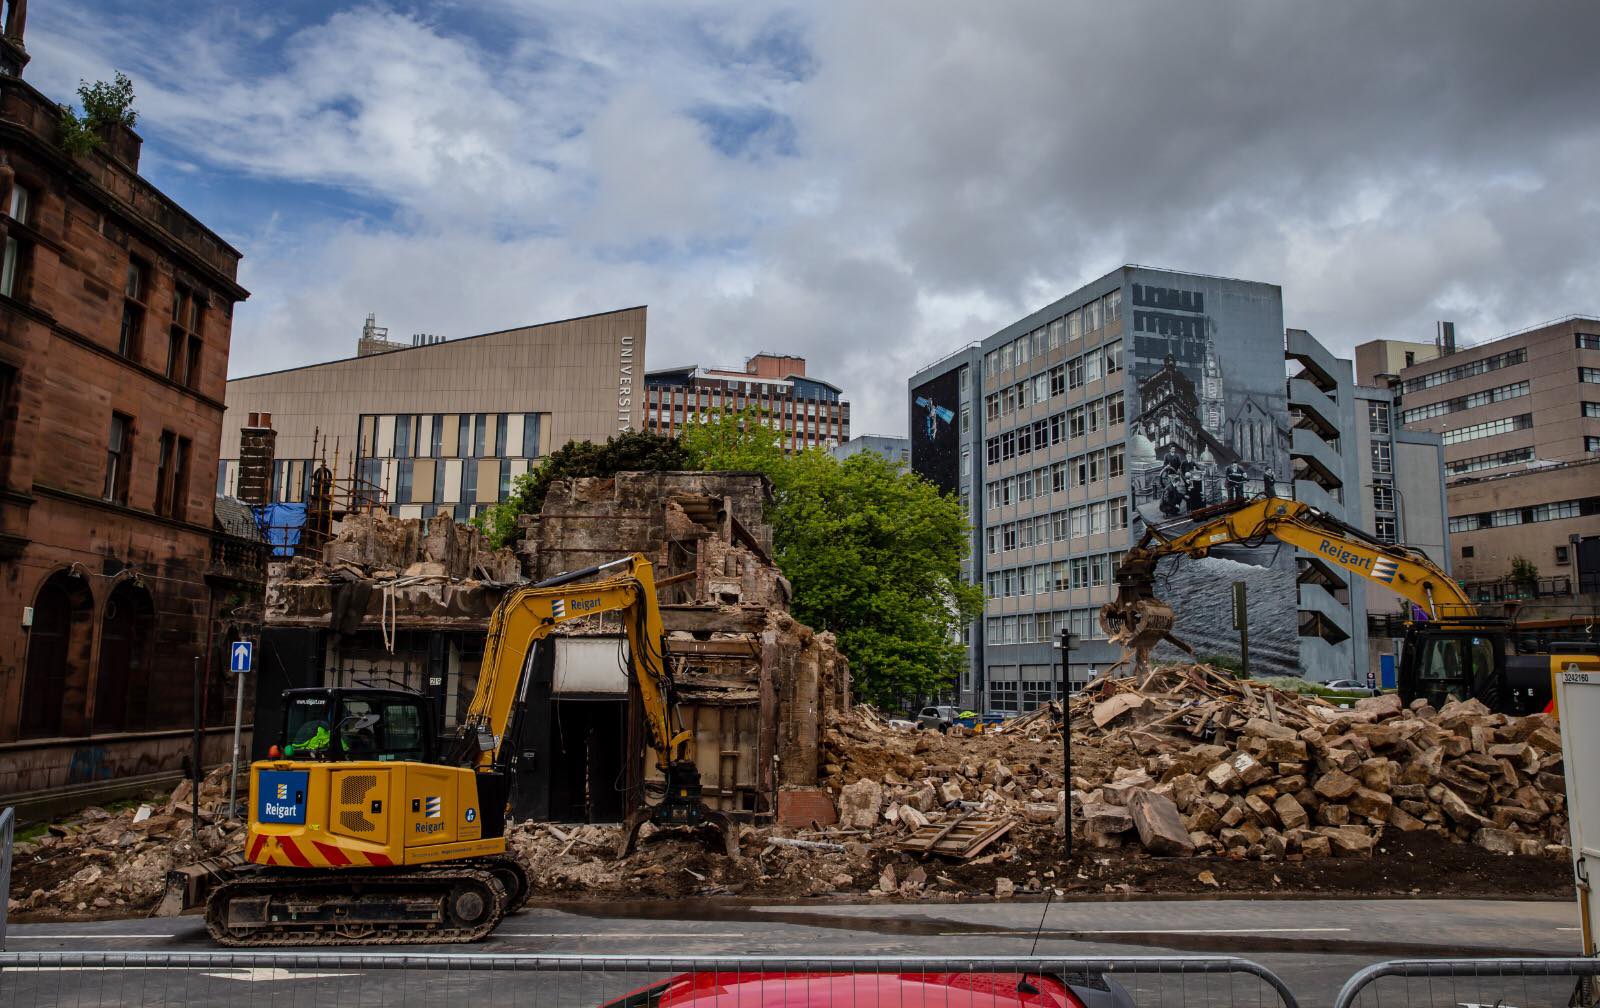 Glasgow's High Street reopens after building demolition complete